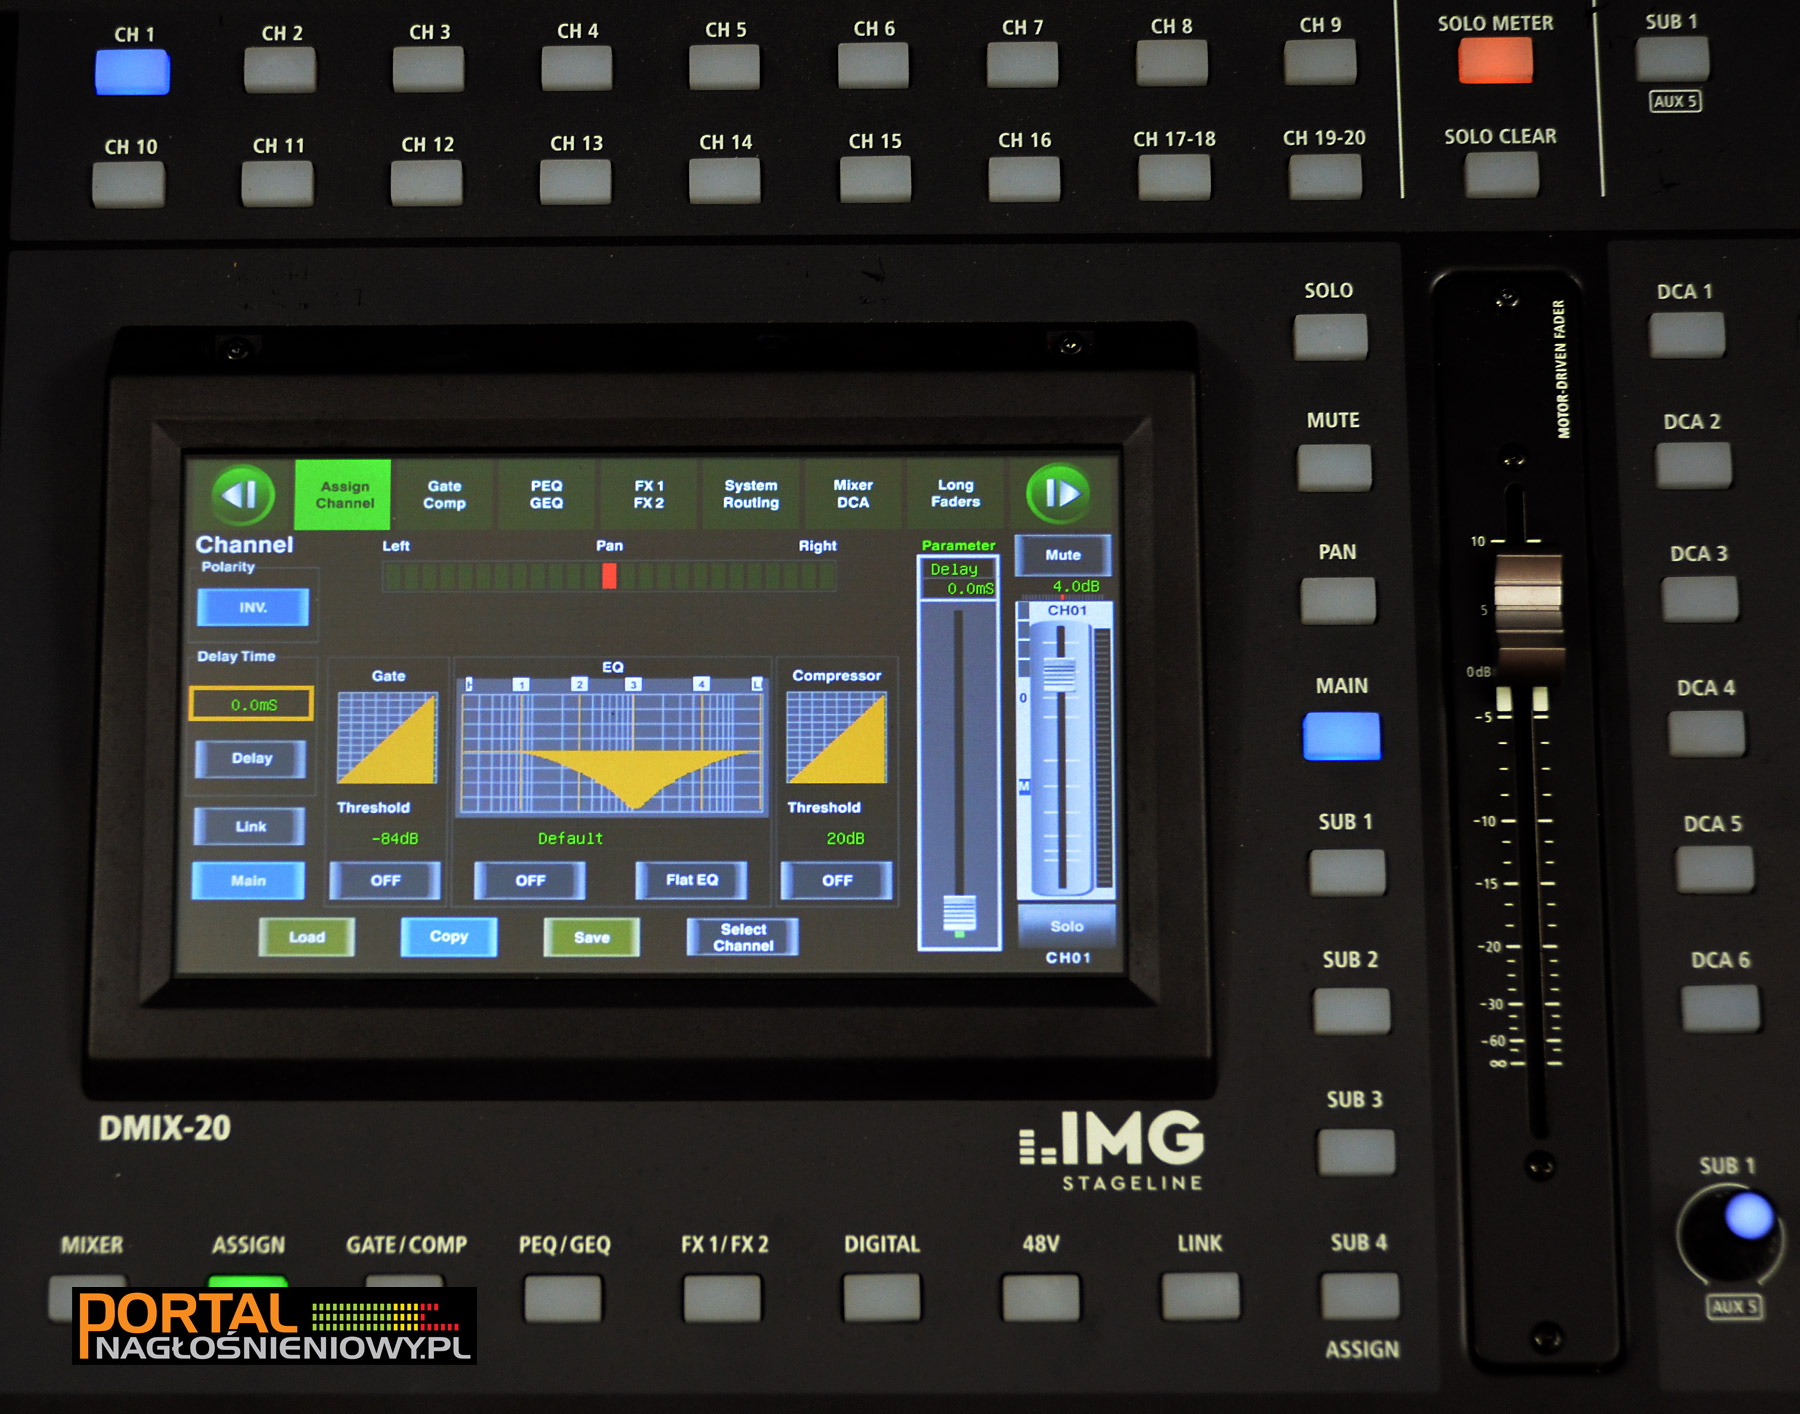 IMG-STAGELINE-DMIX-20-LCD-channel-panel-